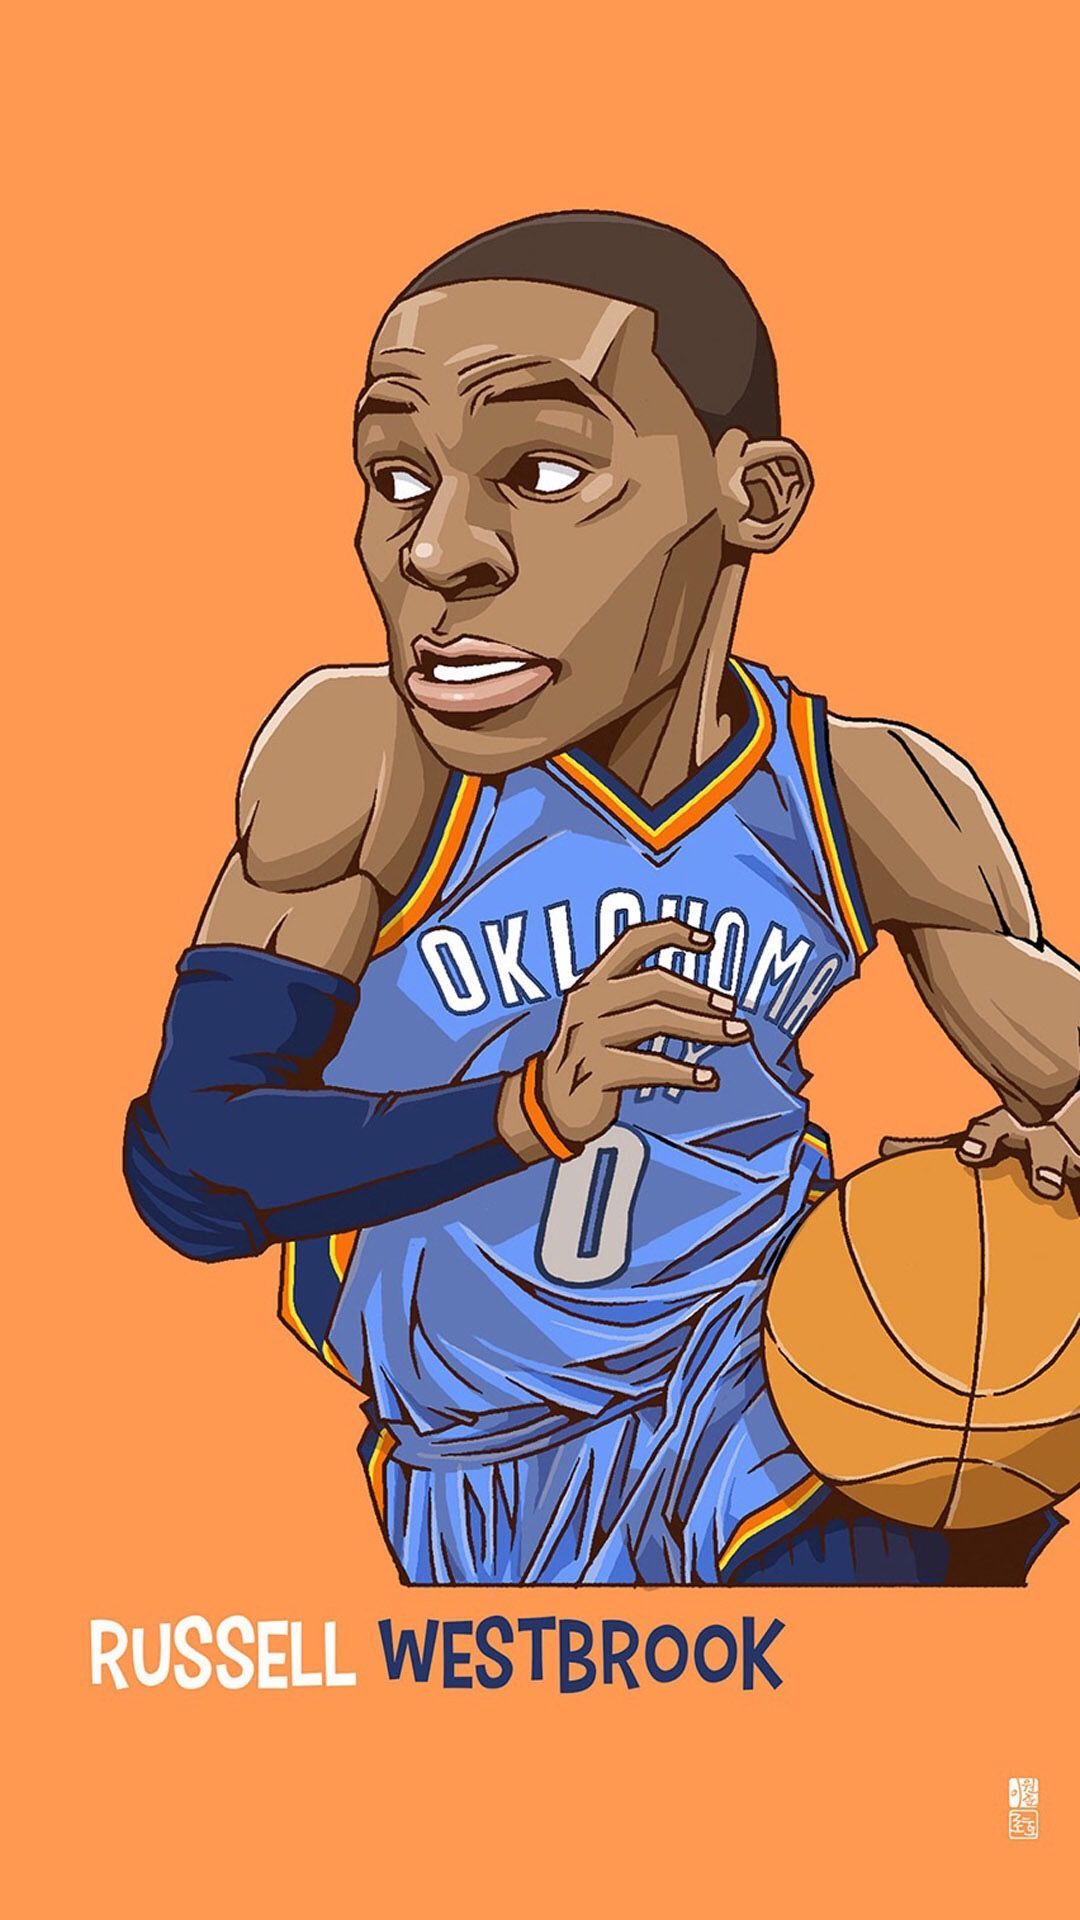 Russell Westbrook. Tap to see Collection of Famous NBA Basketball Players Cute Cartoon Wallpaper. Basketball players, Basketball players nba, Westbrook wallpaper